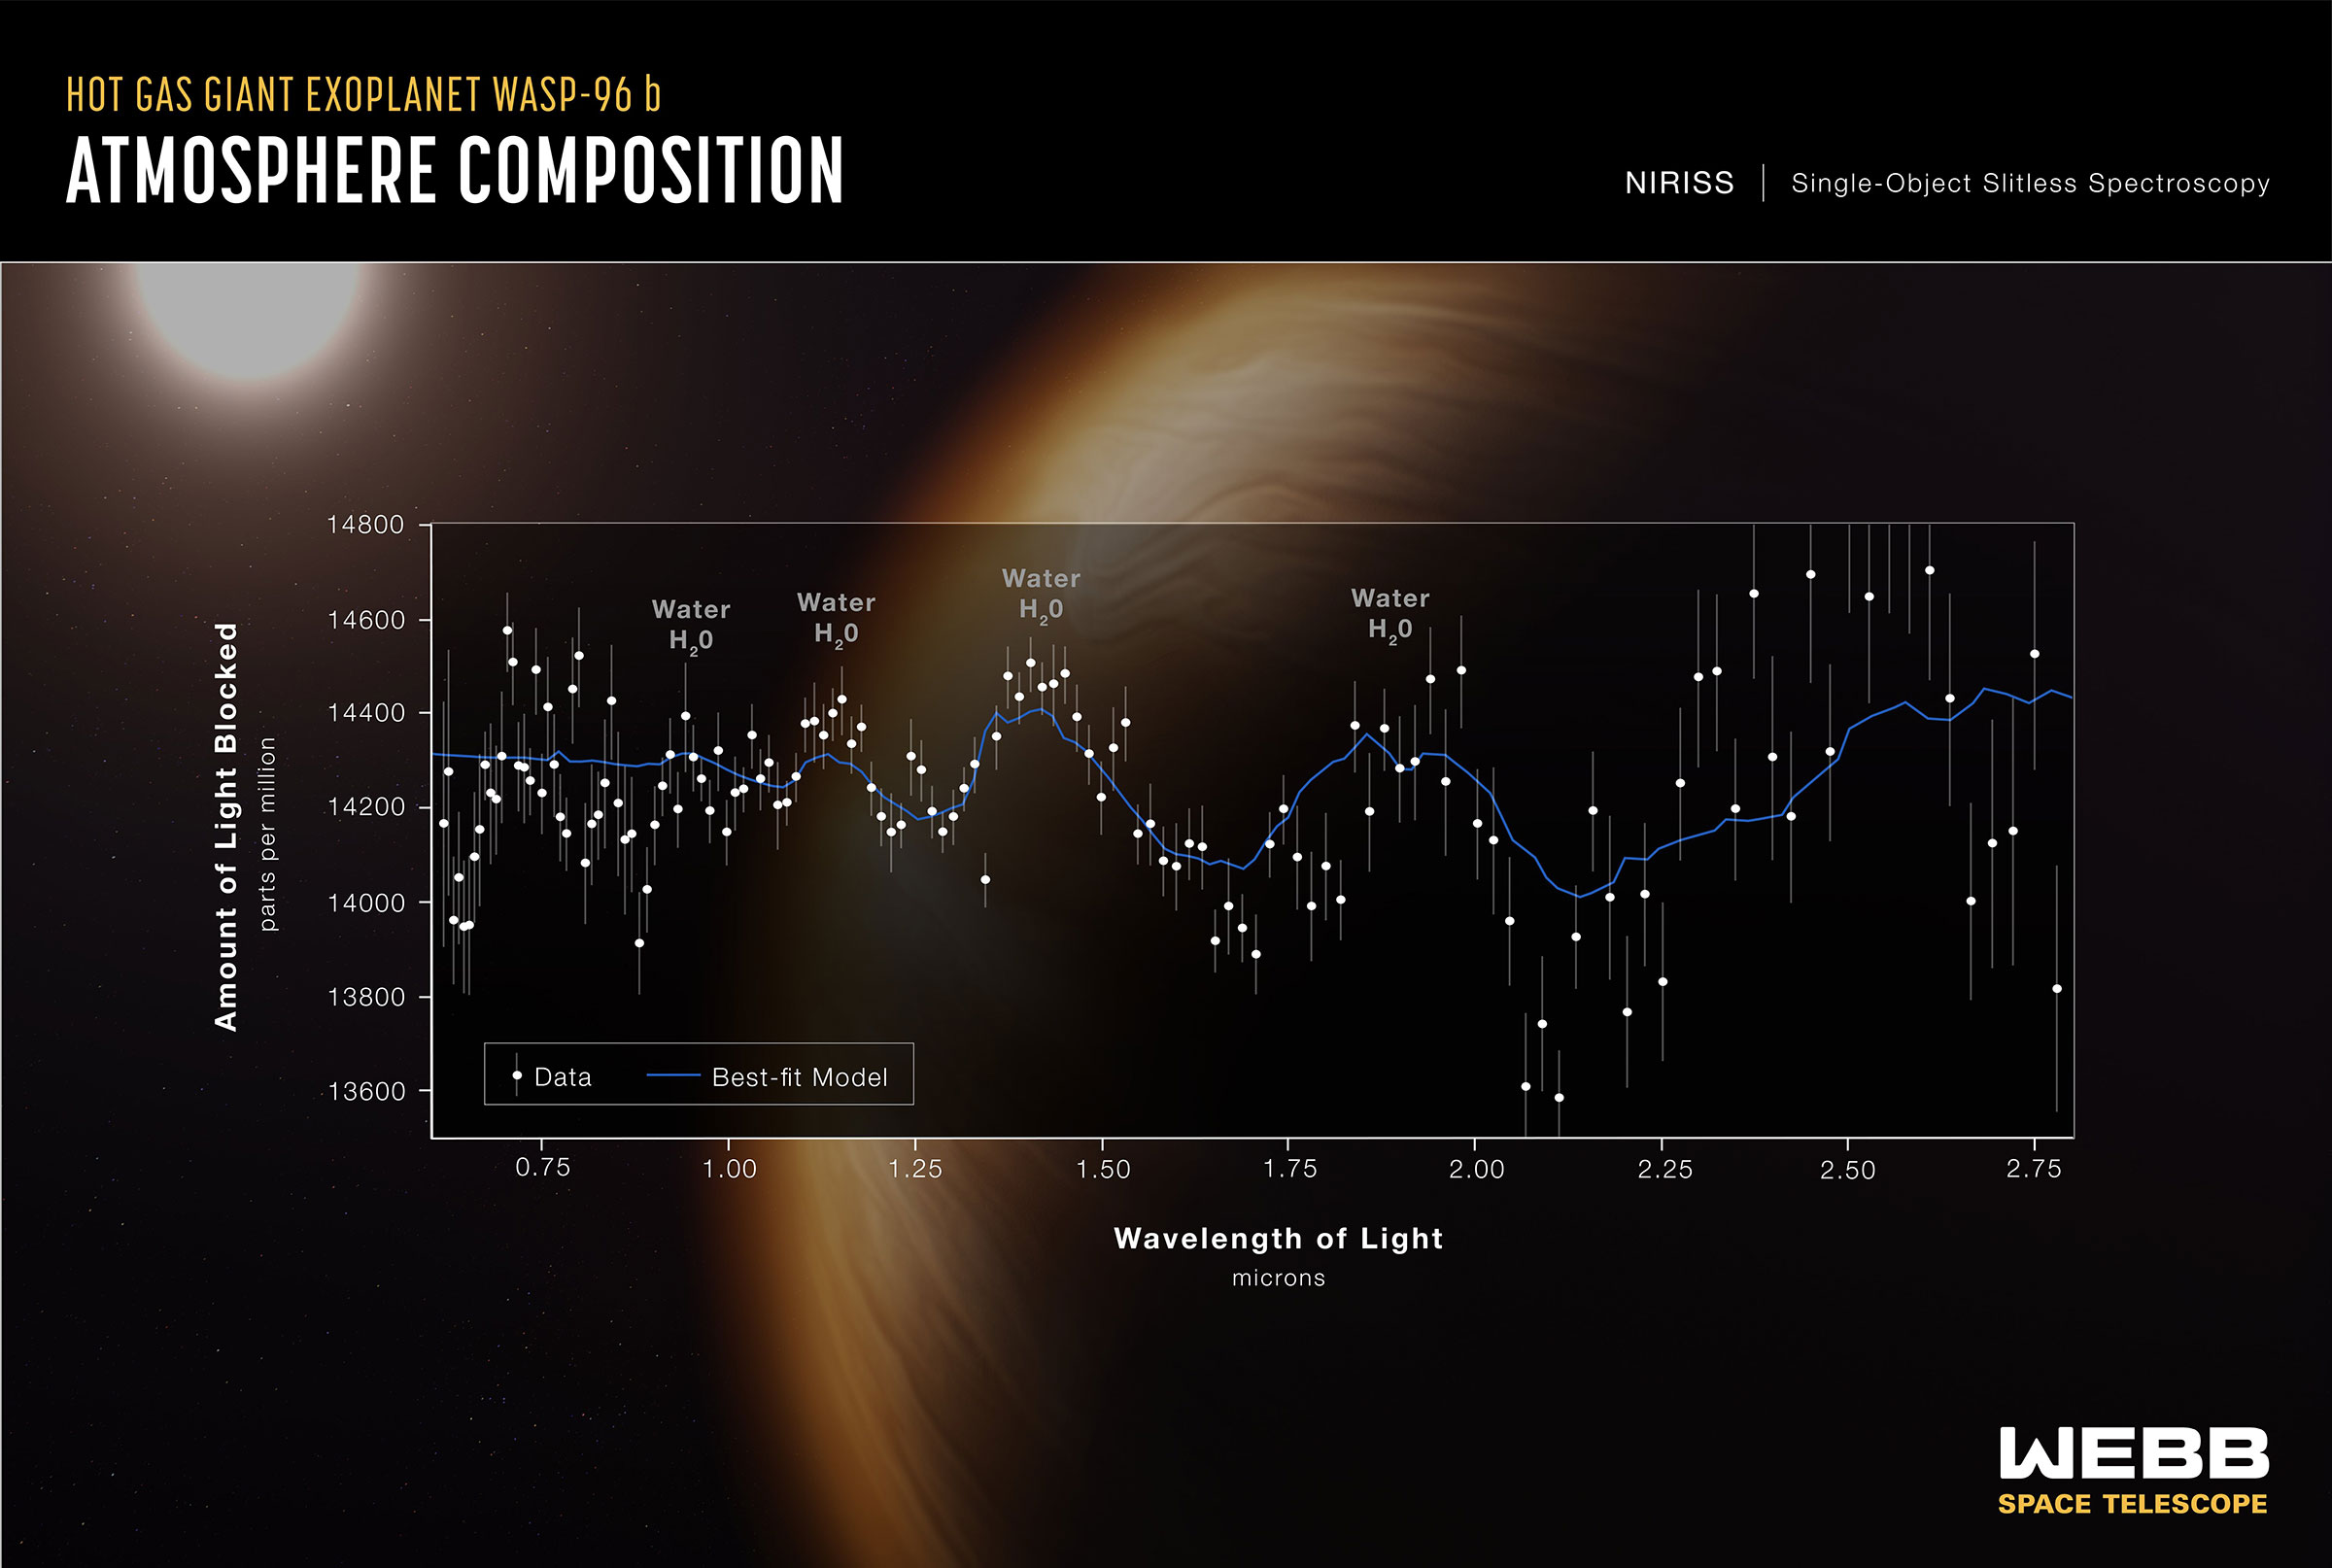 The graphic shows the transmission spectrum of the hot gas giant exoplanet WASP-96 b captured using Webb's NIRISS Single-Object Slitless Spectroscopy with an illustration of the planet and its star in the background. The data points are plotted on a graph of amount of light blocked in parts per million versus wavelength of light in microns. A curvy blue line represents a best-fit model. Four prominent peaks visible in the data and model are labeled “water, H2O.” (NASA, ESA, CSA, STScI)